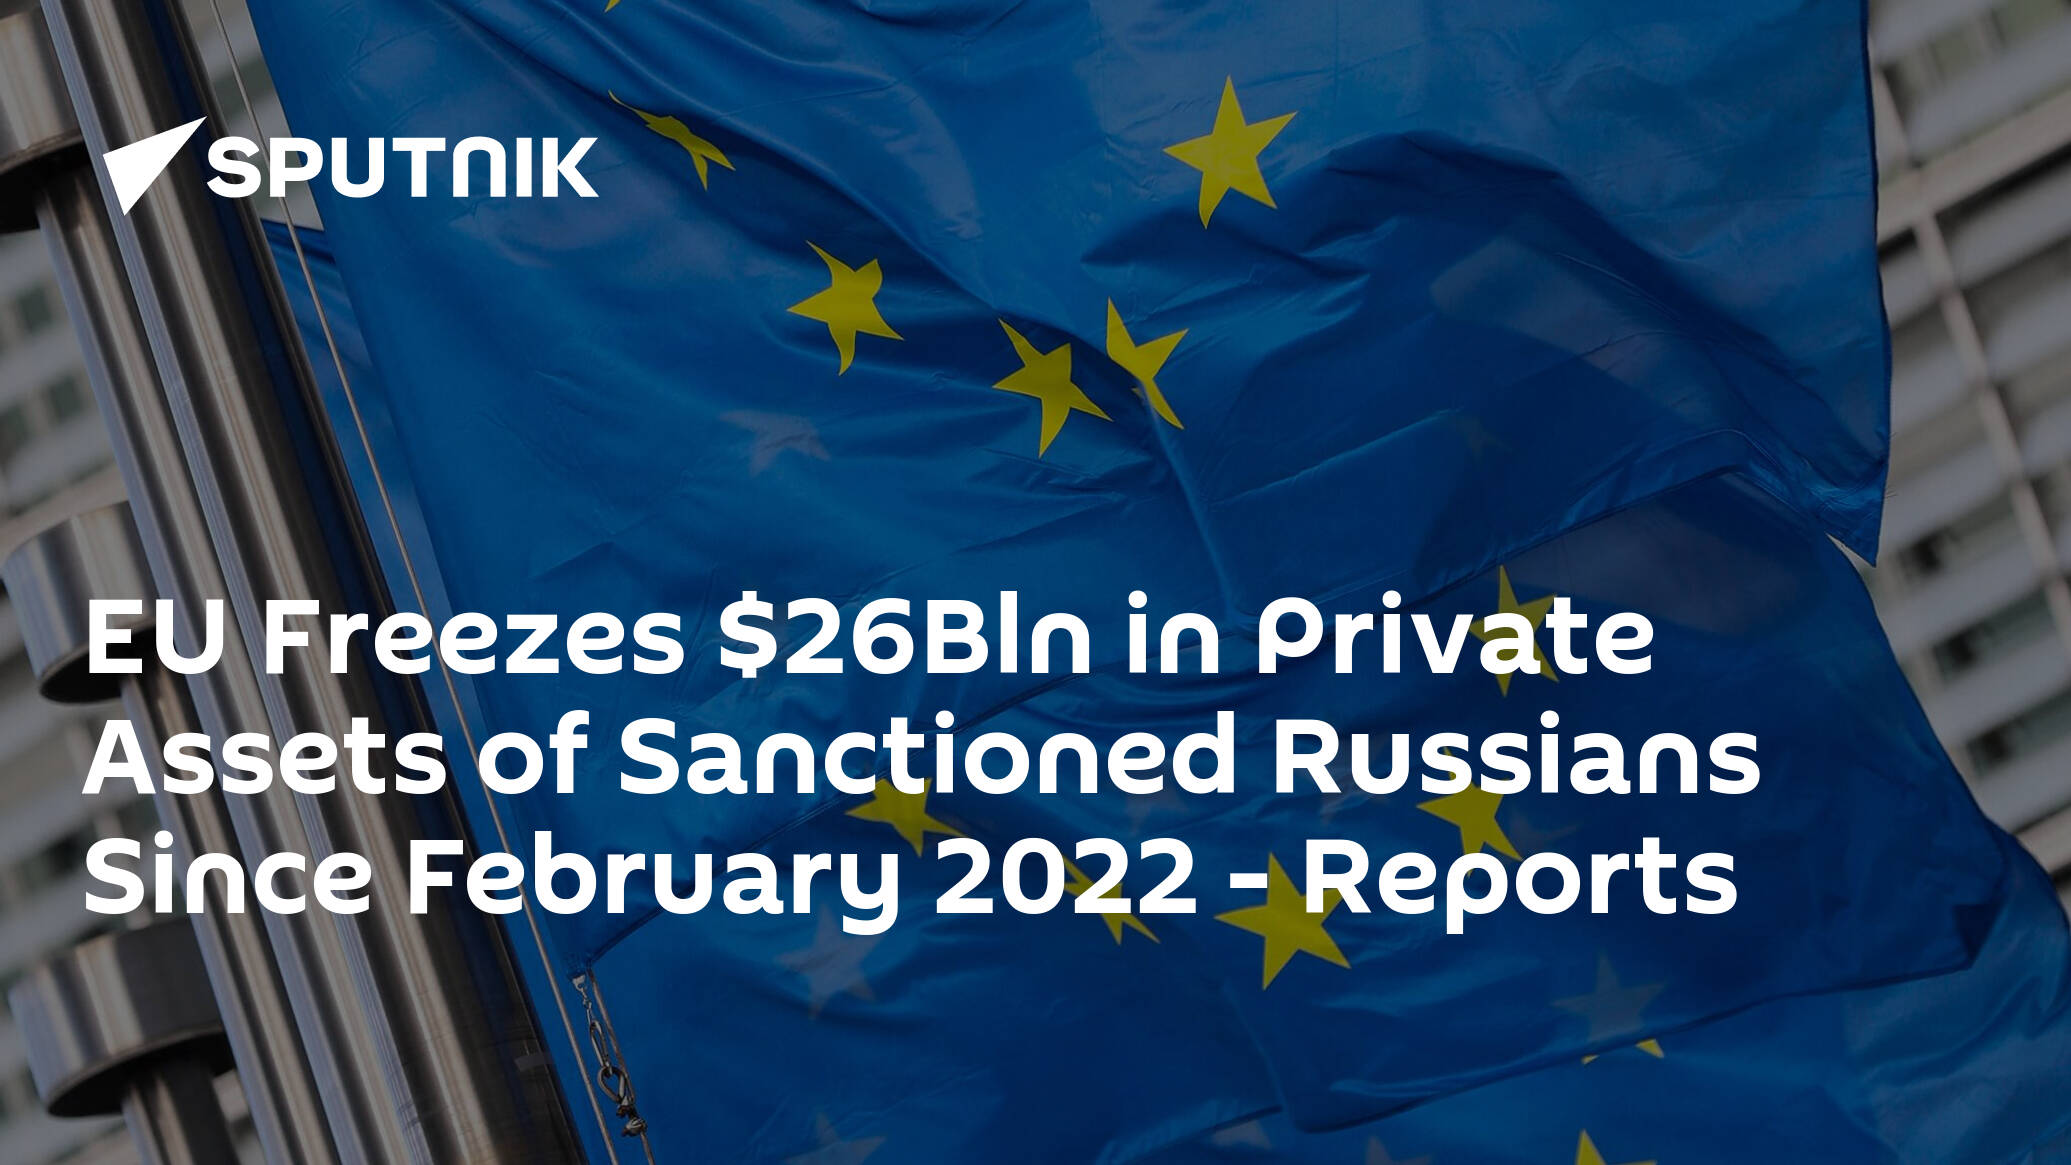 EU Freezes Bln in Private Assets of Sanctioned Russians Since February 2022 – Reports